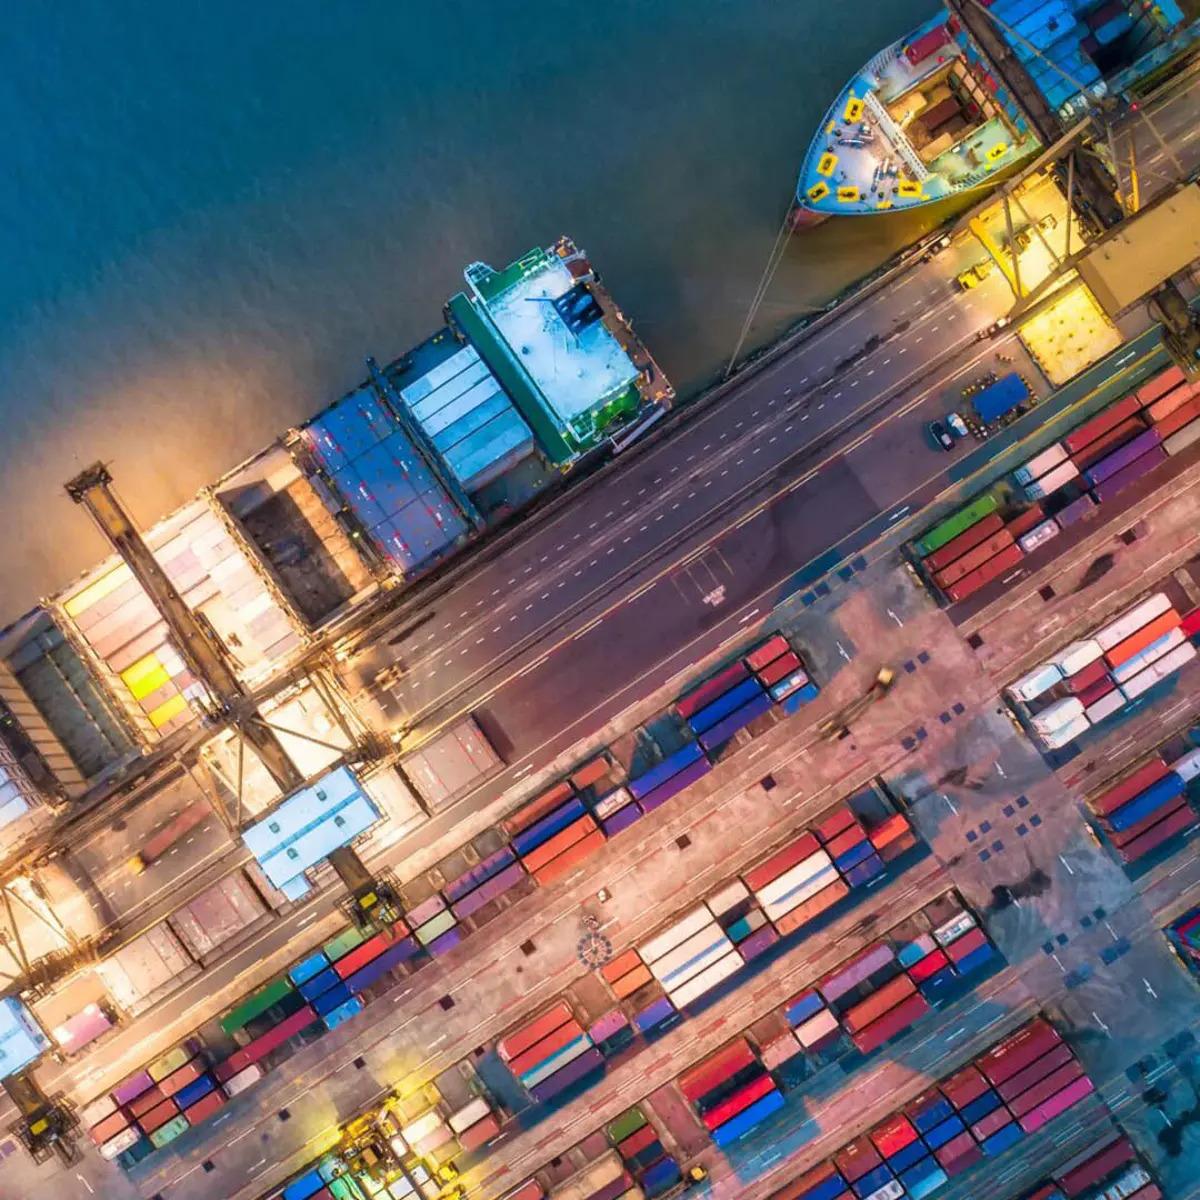 Aerial view of a busy shipping port.